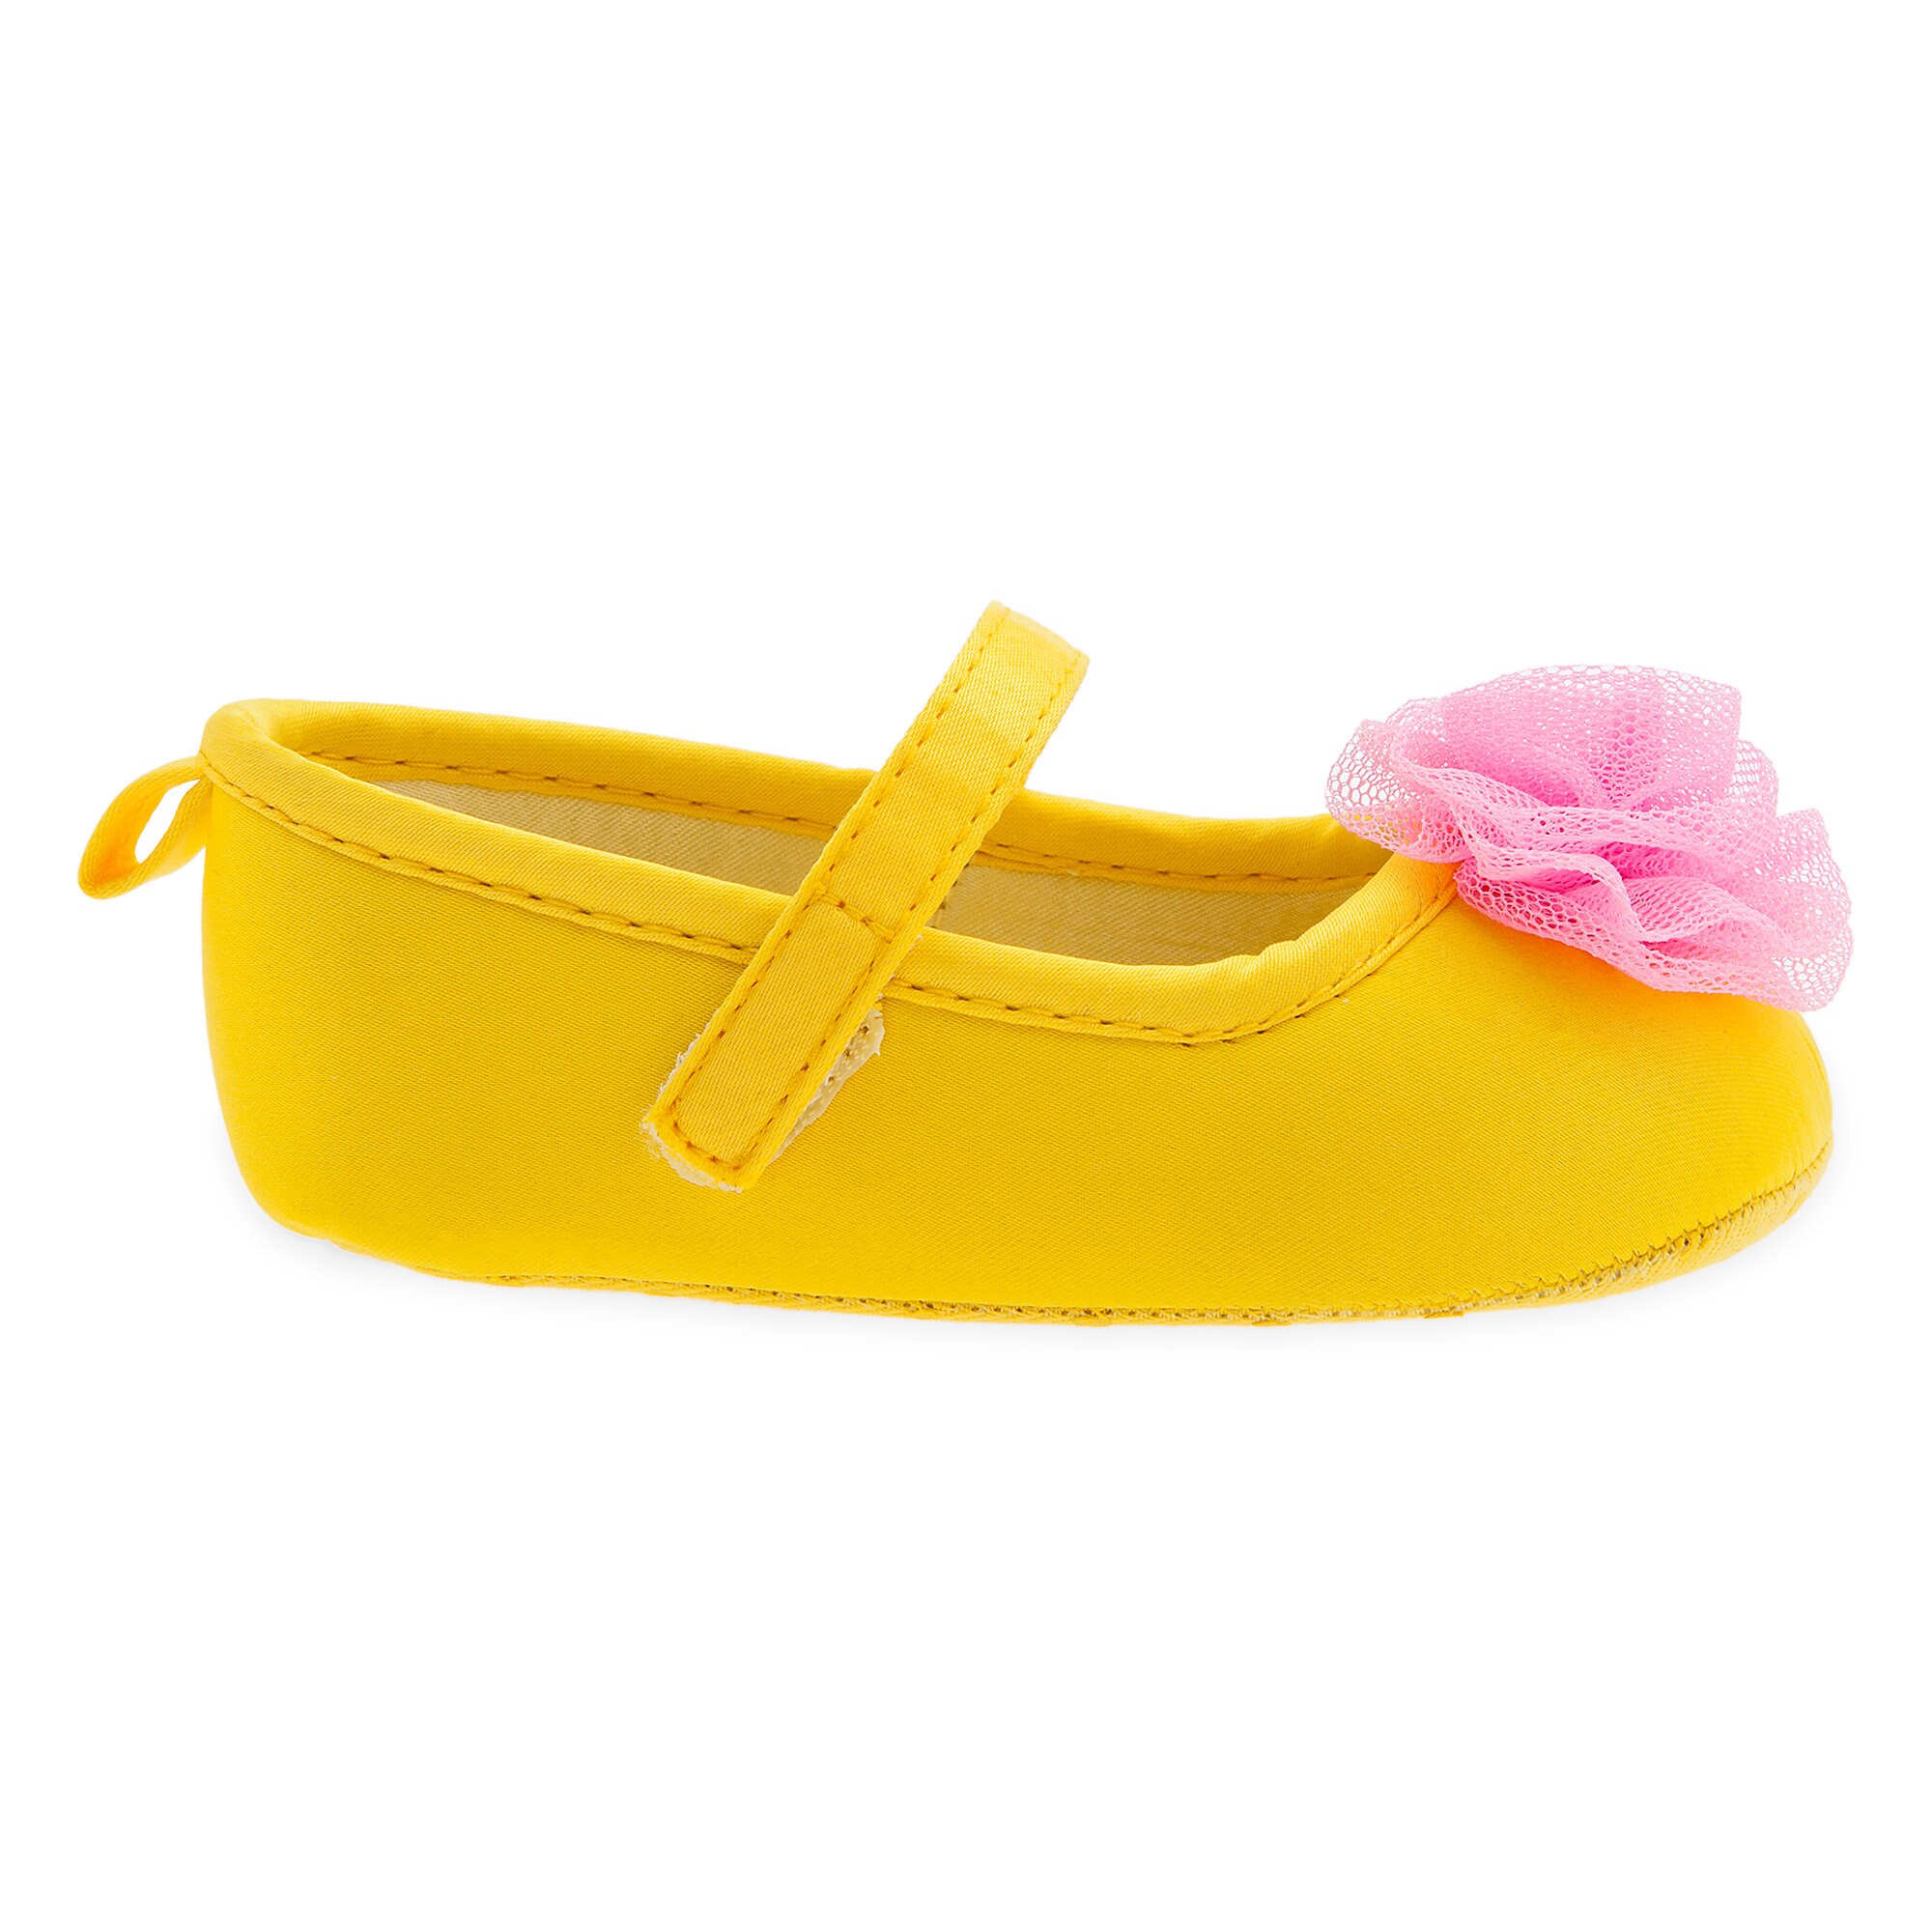 Belle Costume Shoes for Baby